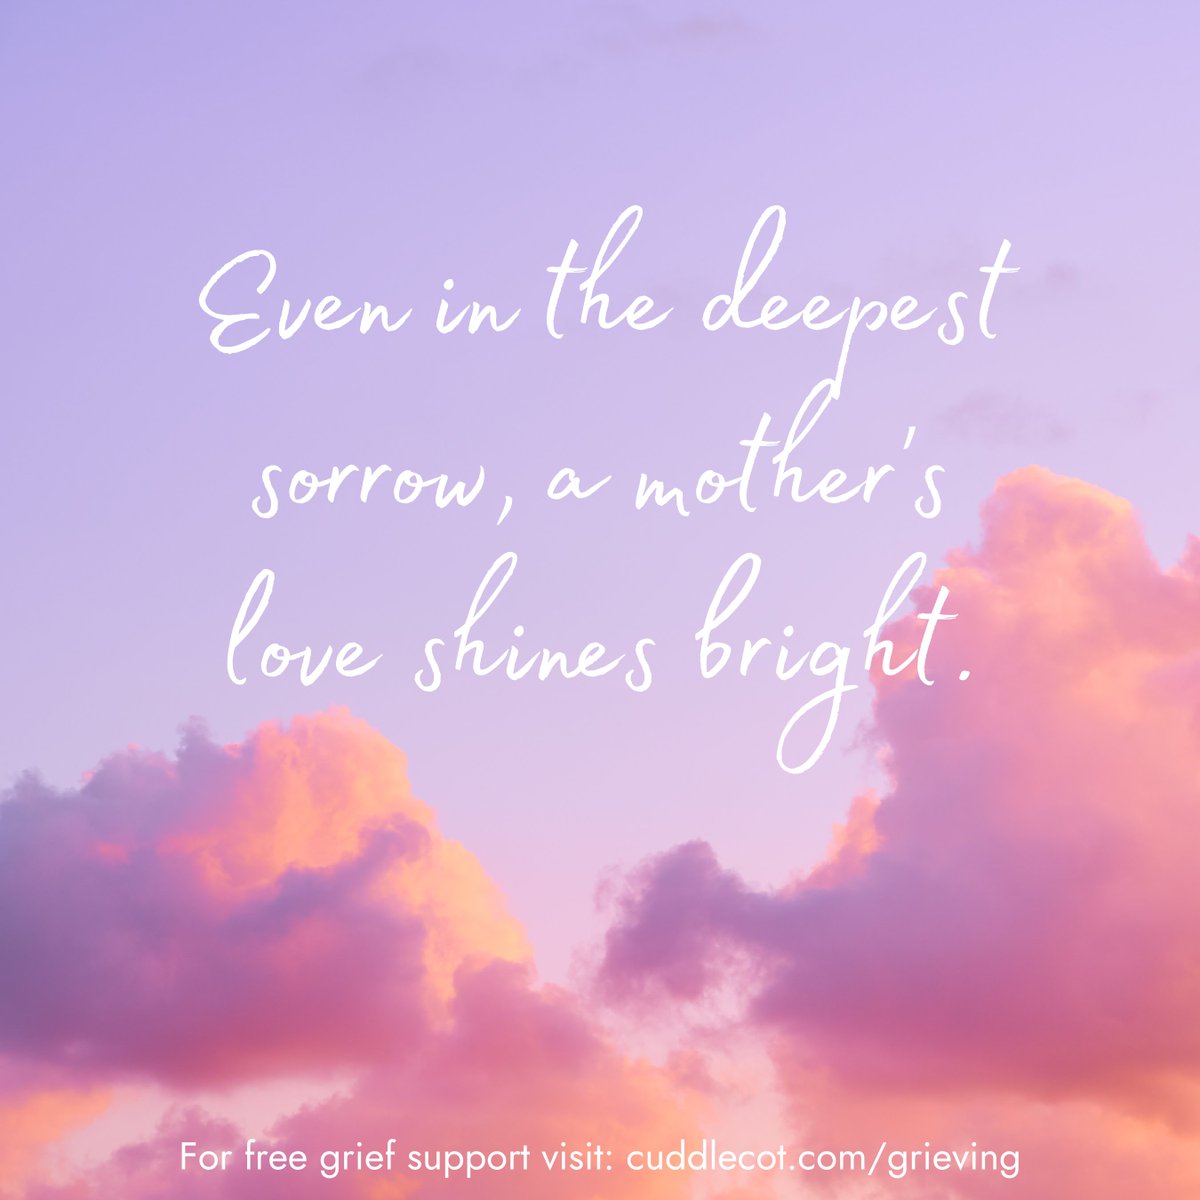 🕯️ Today, on International Bereaved Mothers Day, we honour all mothers who have experienced the profound loss of a child. 💙 Our free online bereavement chat service is here for you. Visit: cuddlecot.com/grieving
#BereavedMothersDay #InfertilityAwareness #GriefSupport #BabyLoss